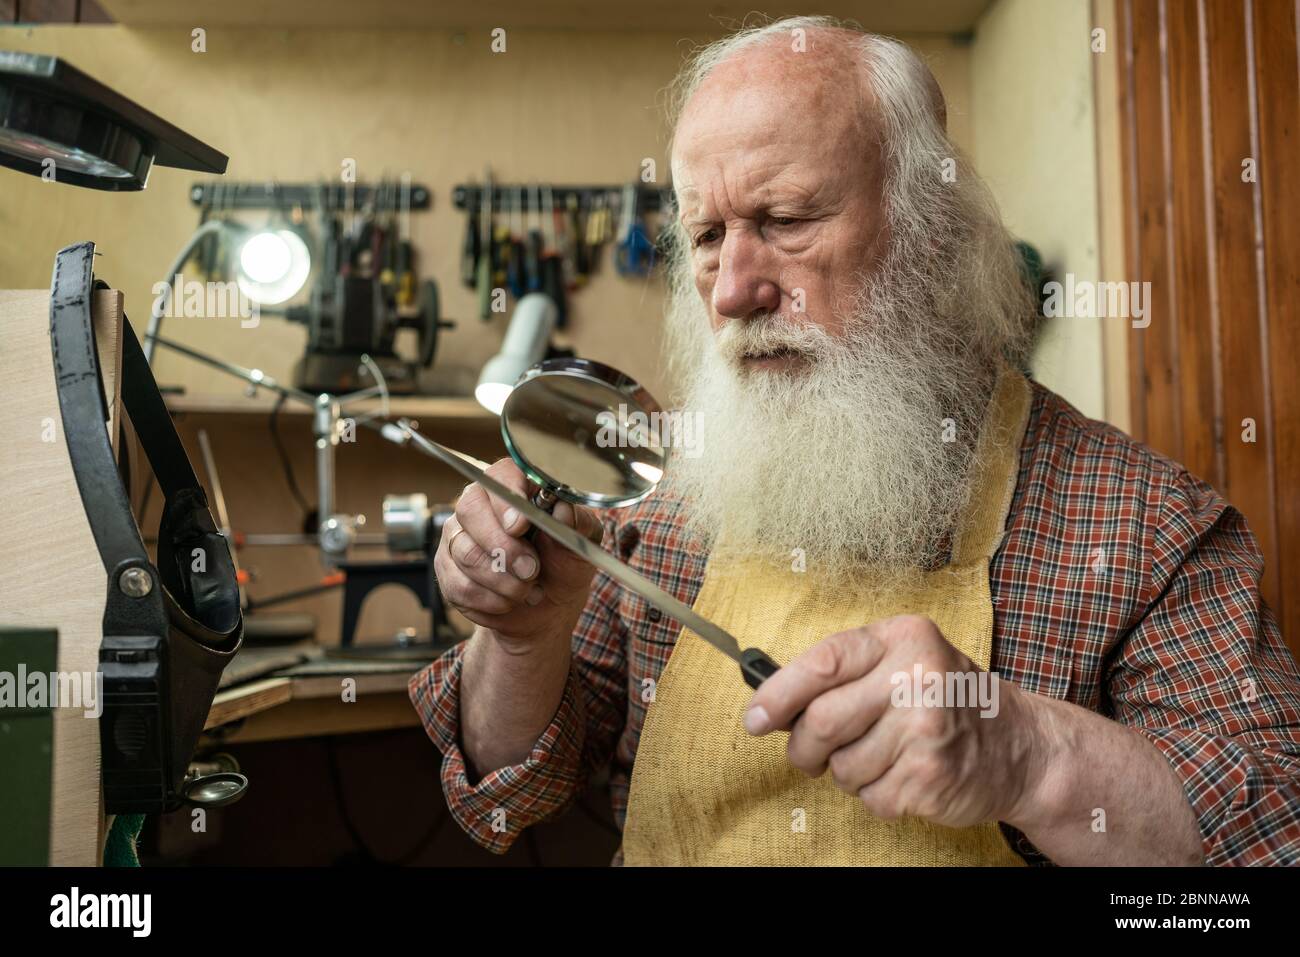 A man looks through a magnifying glass on the cutting edge of the knife to check its sharpening Stock Photo